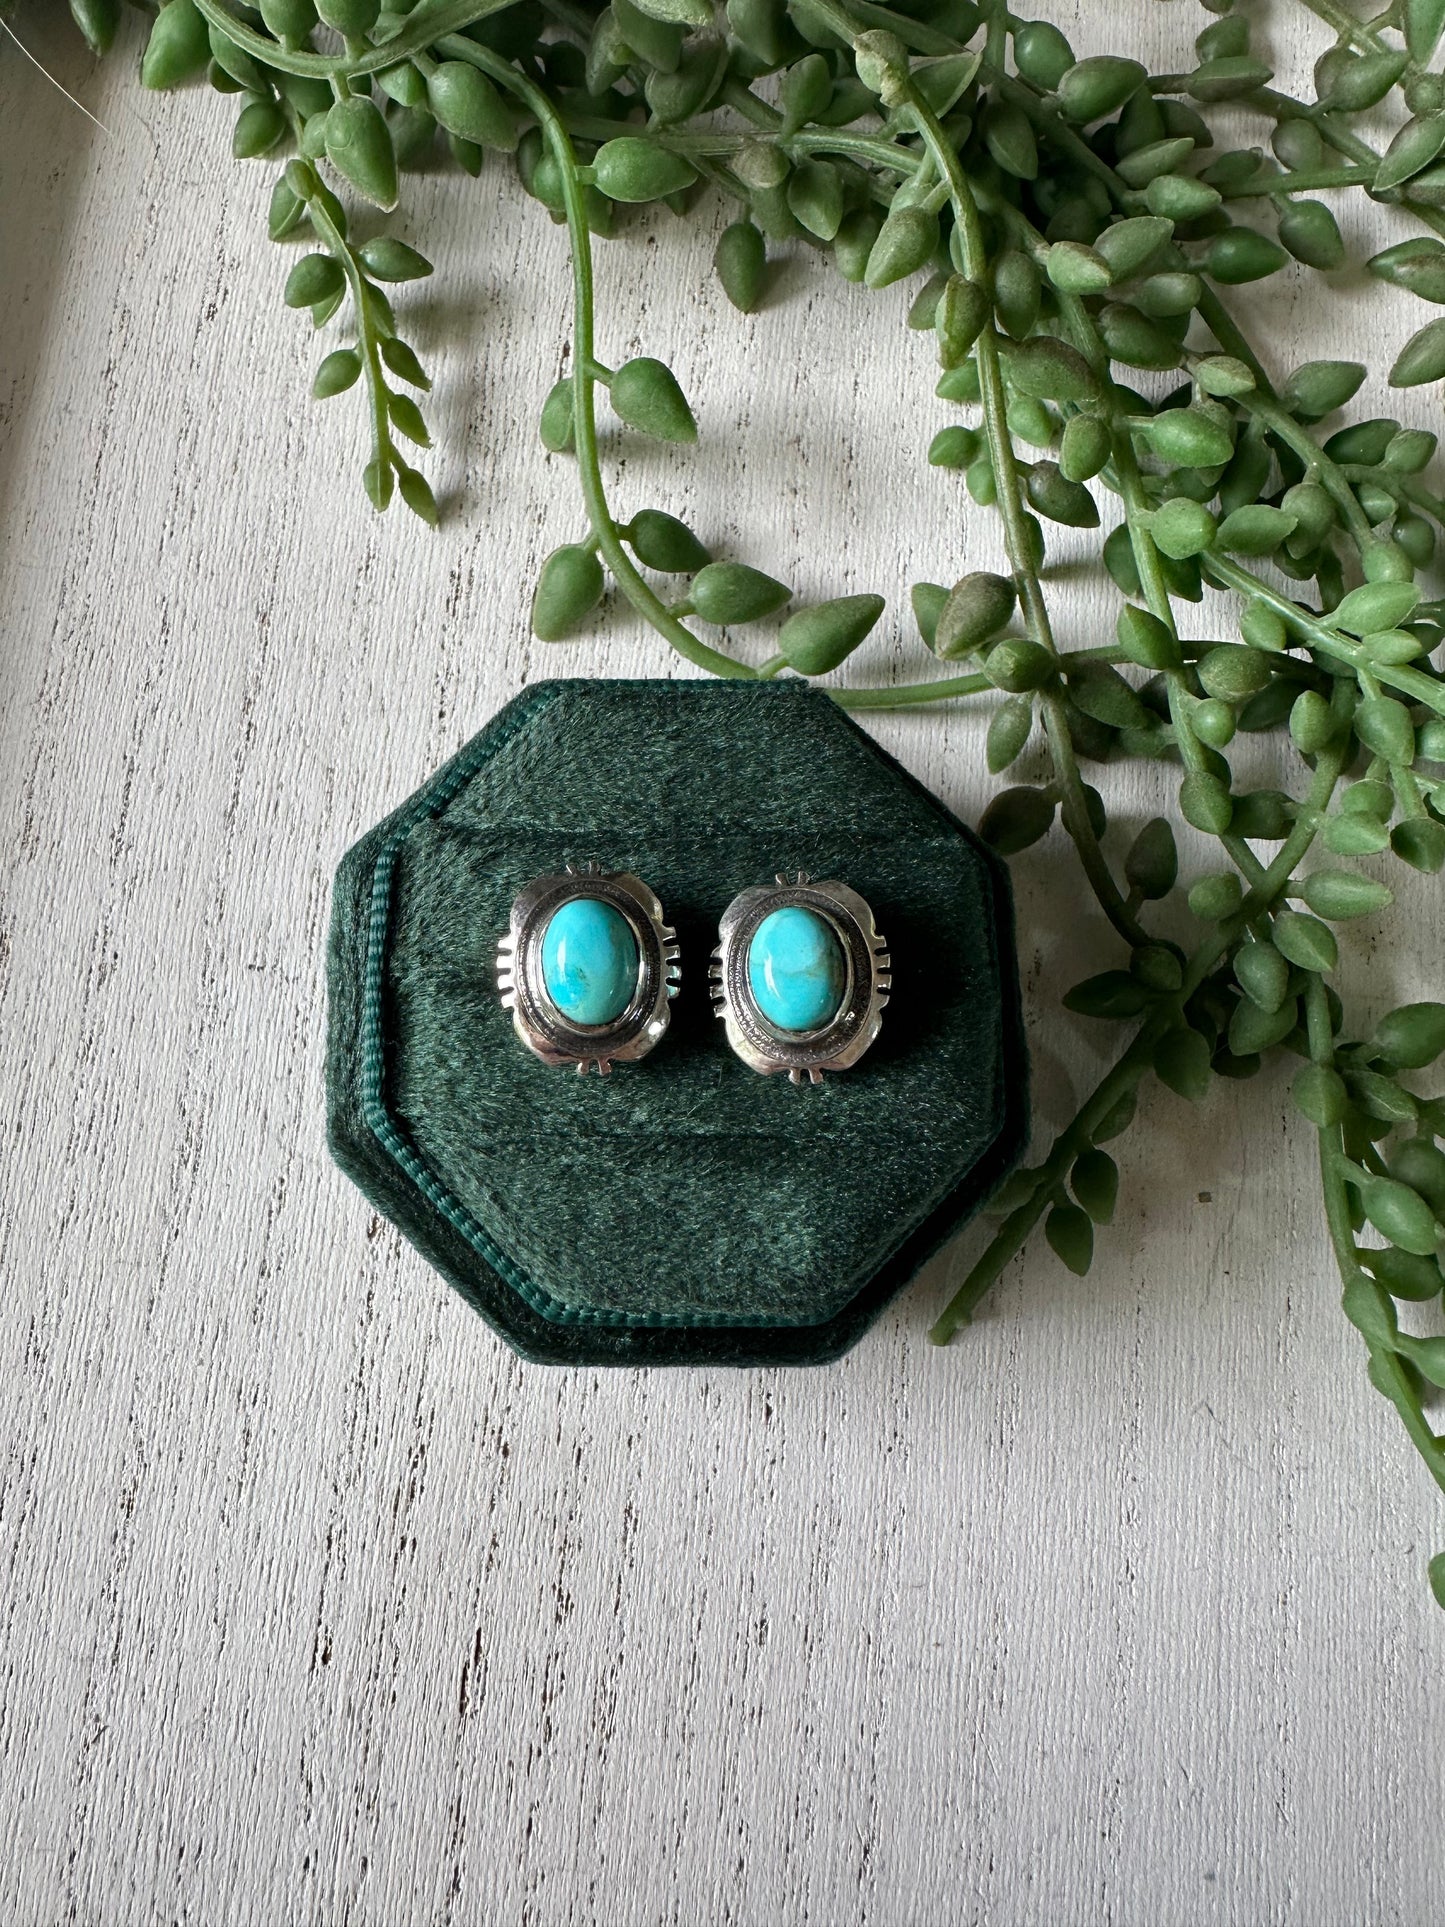 Handmade Turquoise And Sterling Silver Stud Earrings